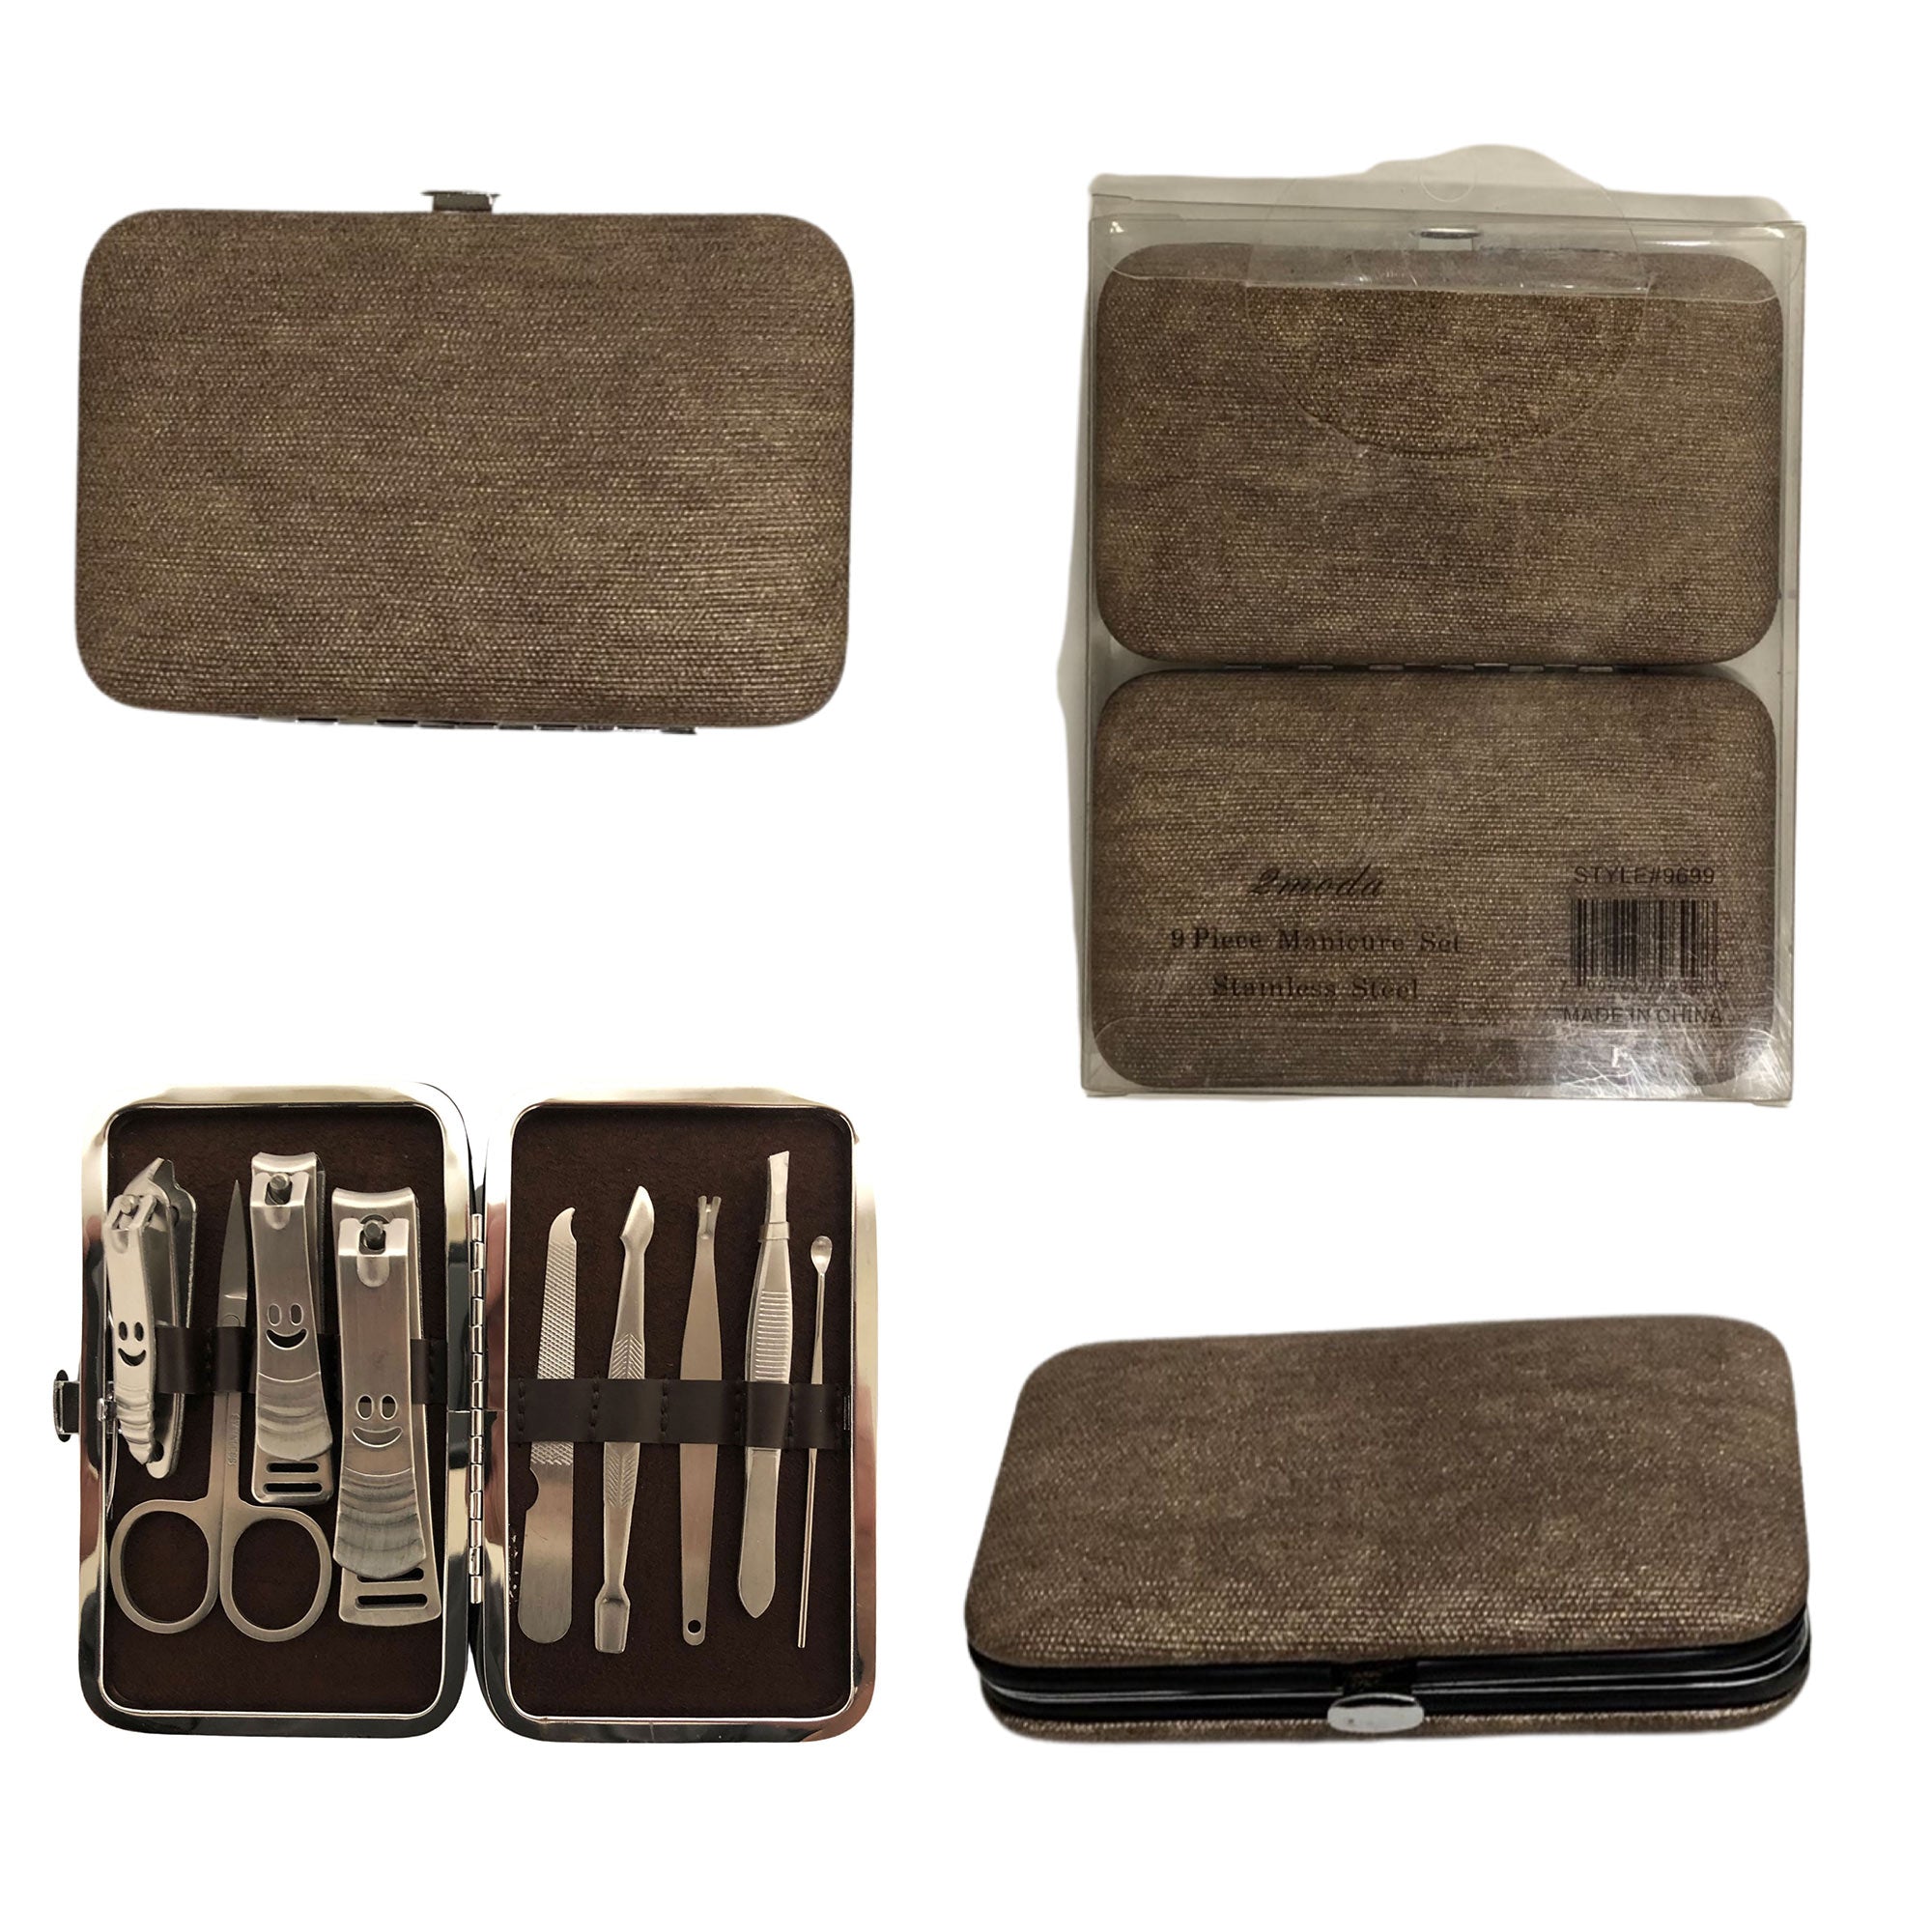 CLEARANCE MANICURE SET IN LT BROWN CASE (CASE OF 24 - $2.50 / PIECE)  Wholesale 9 Piece Stainless Steel Manicure Set in Light Brown SKU: 9699-9019-SMT-LT BROWN-24